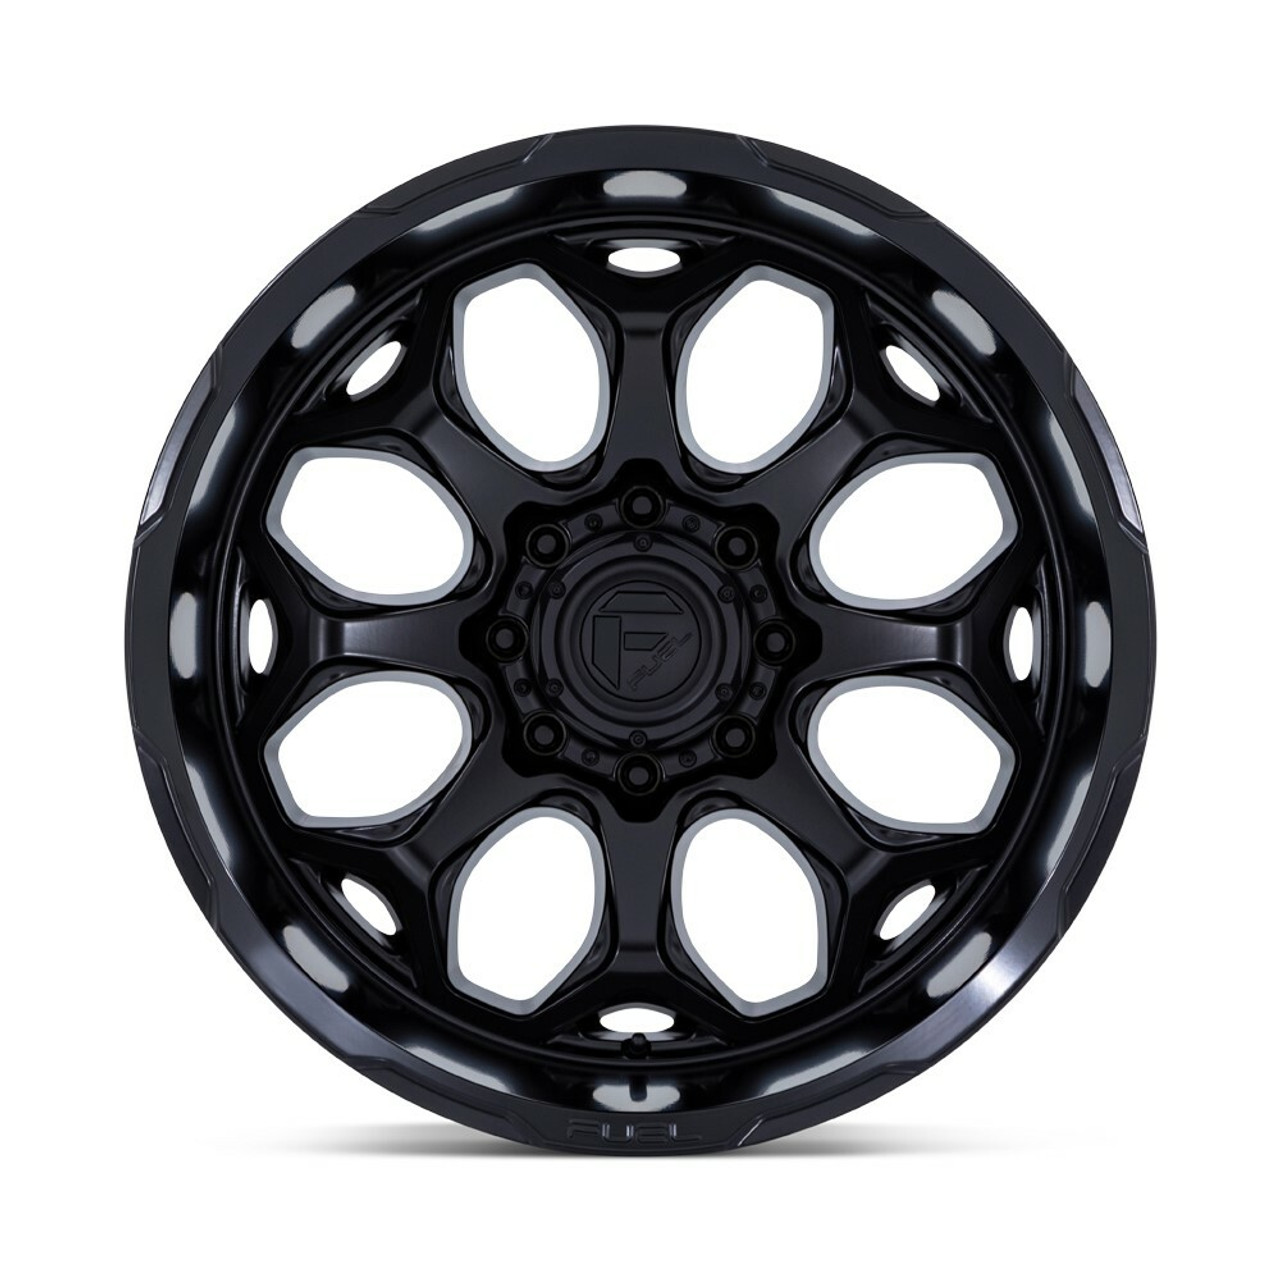 Fuel FC862 Scepter 22x12 8x170 Blackout Rim 22" -44mm Lifted For Ford F250 F350